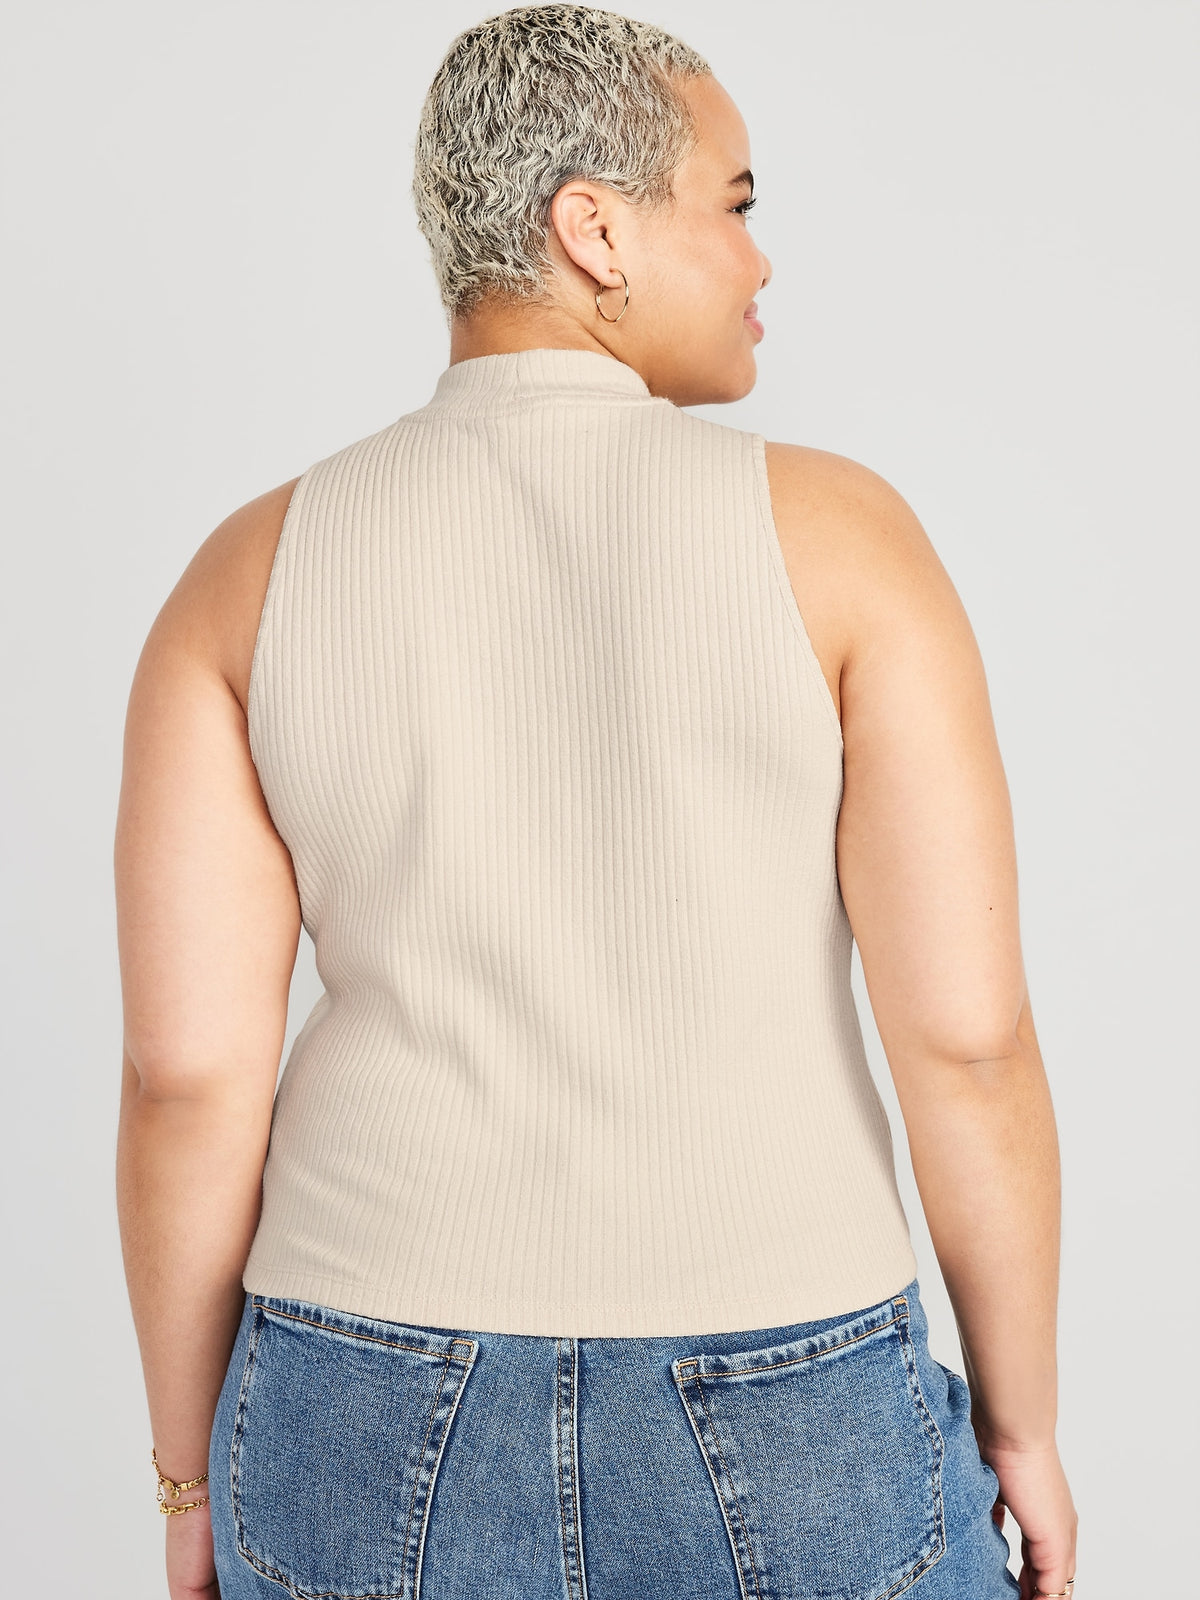 Fitted Sleeveless Mock-Neck Top for Women - Old Navy Philippines